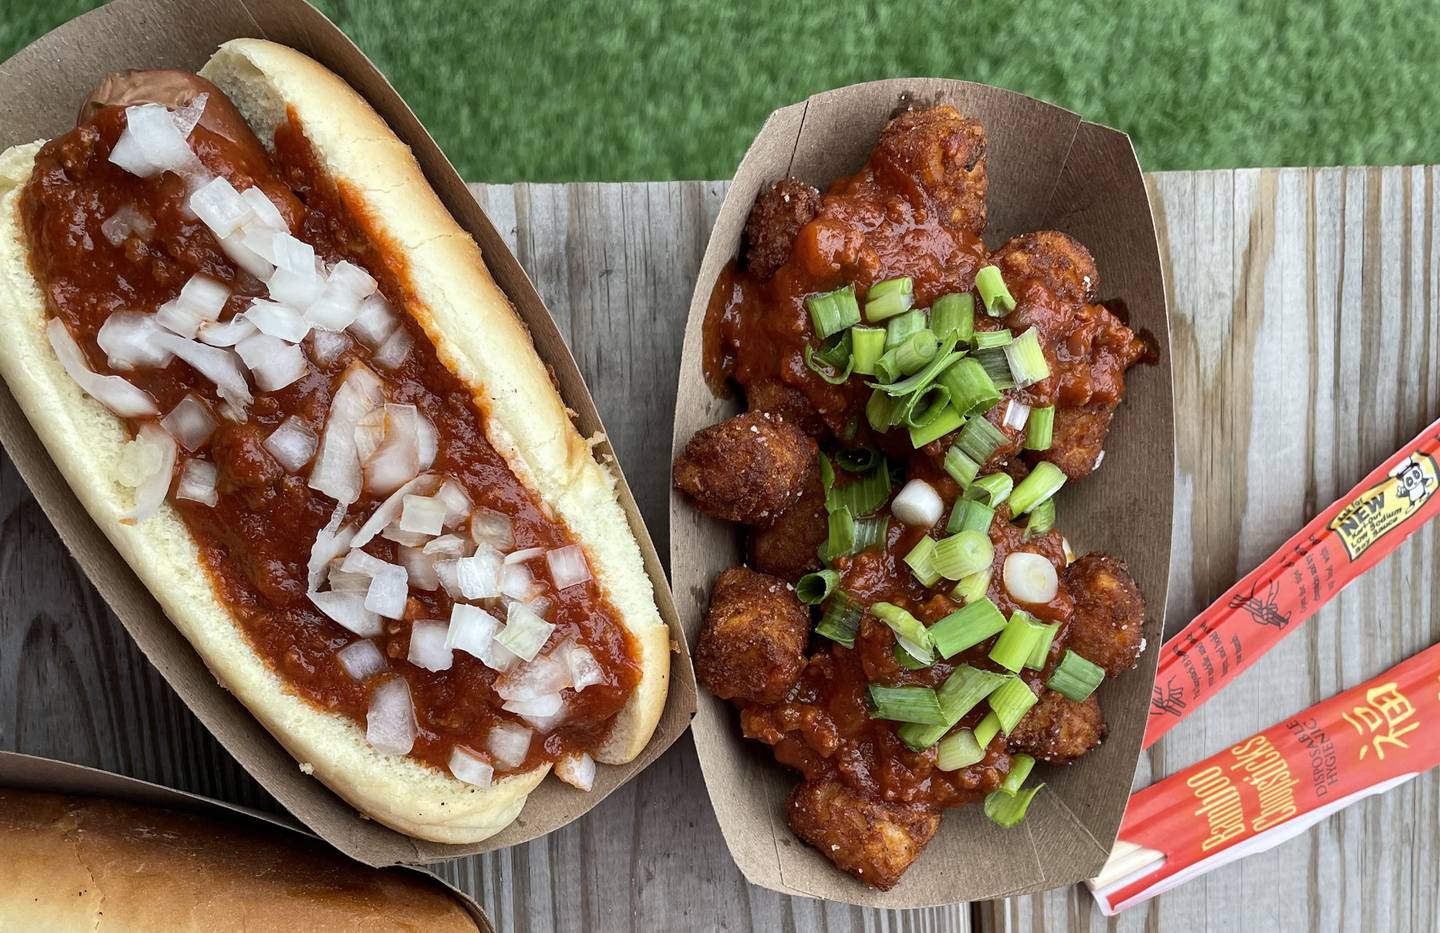 The hot dog and tater tots from Glizzy's, both topped with Wagyu chili. Owner Casey Jarvis previously worked at Chuck's Trading Post in Hampden.